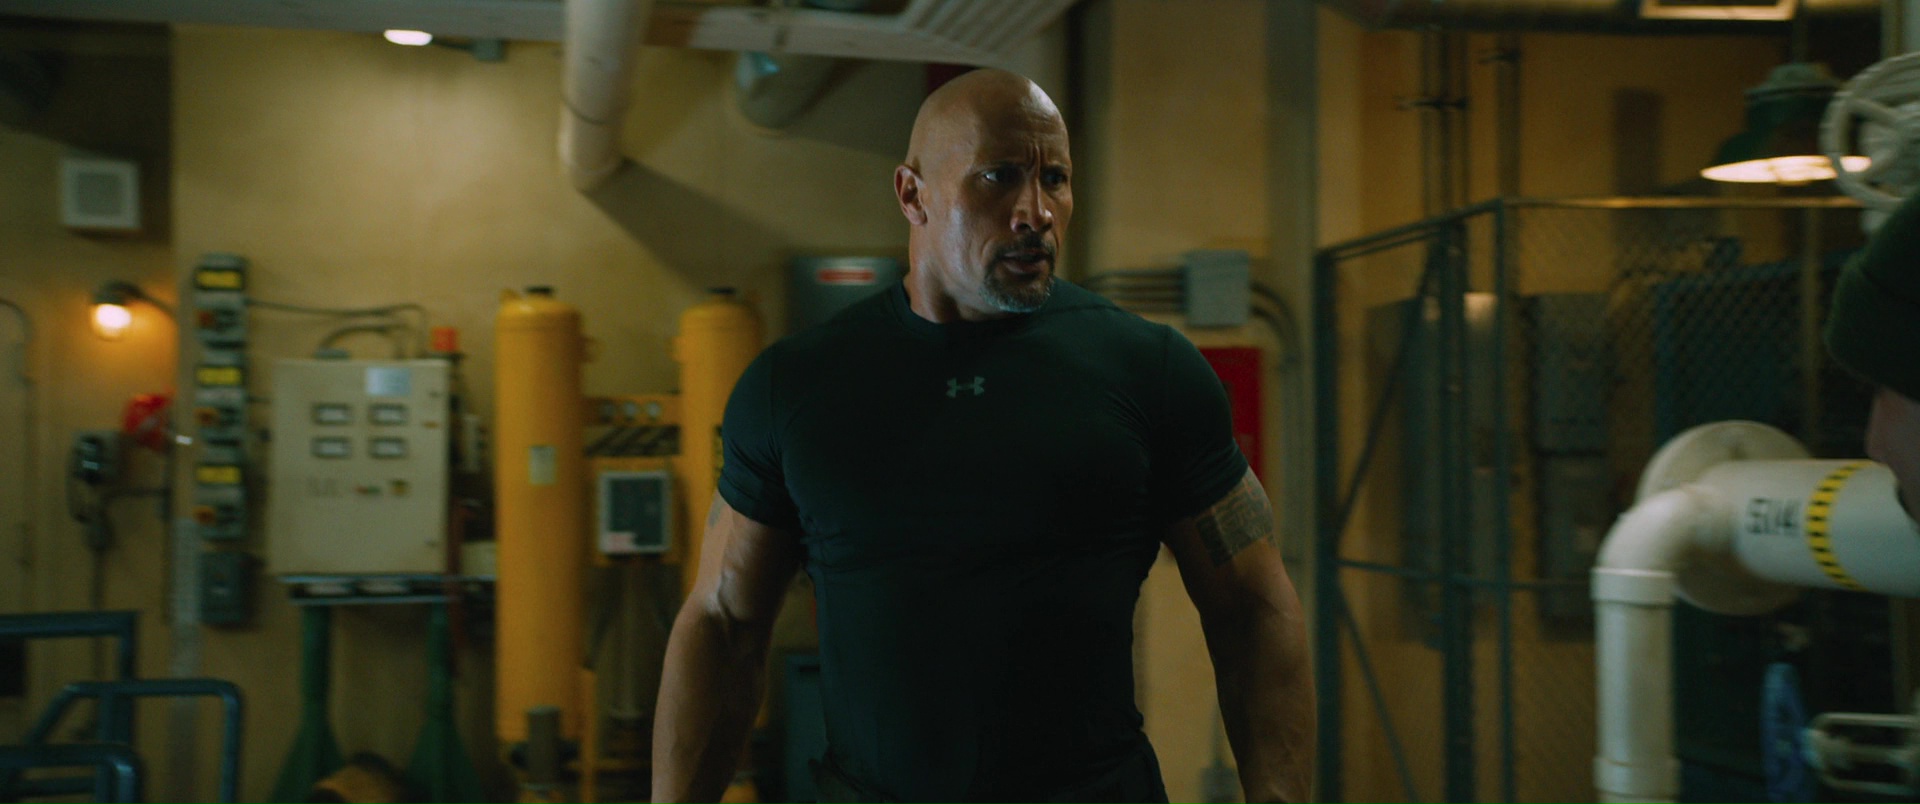 Under Armour T-Shirt Worn By Dwayne Johnson Rock) The Fate Of The Furious